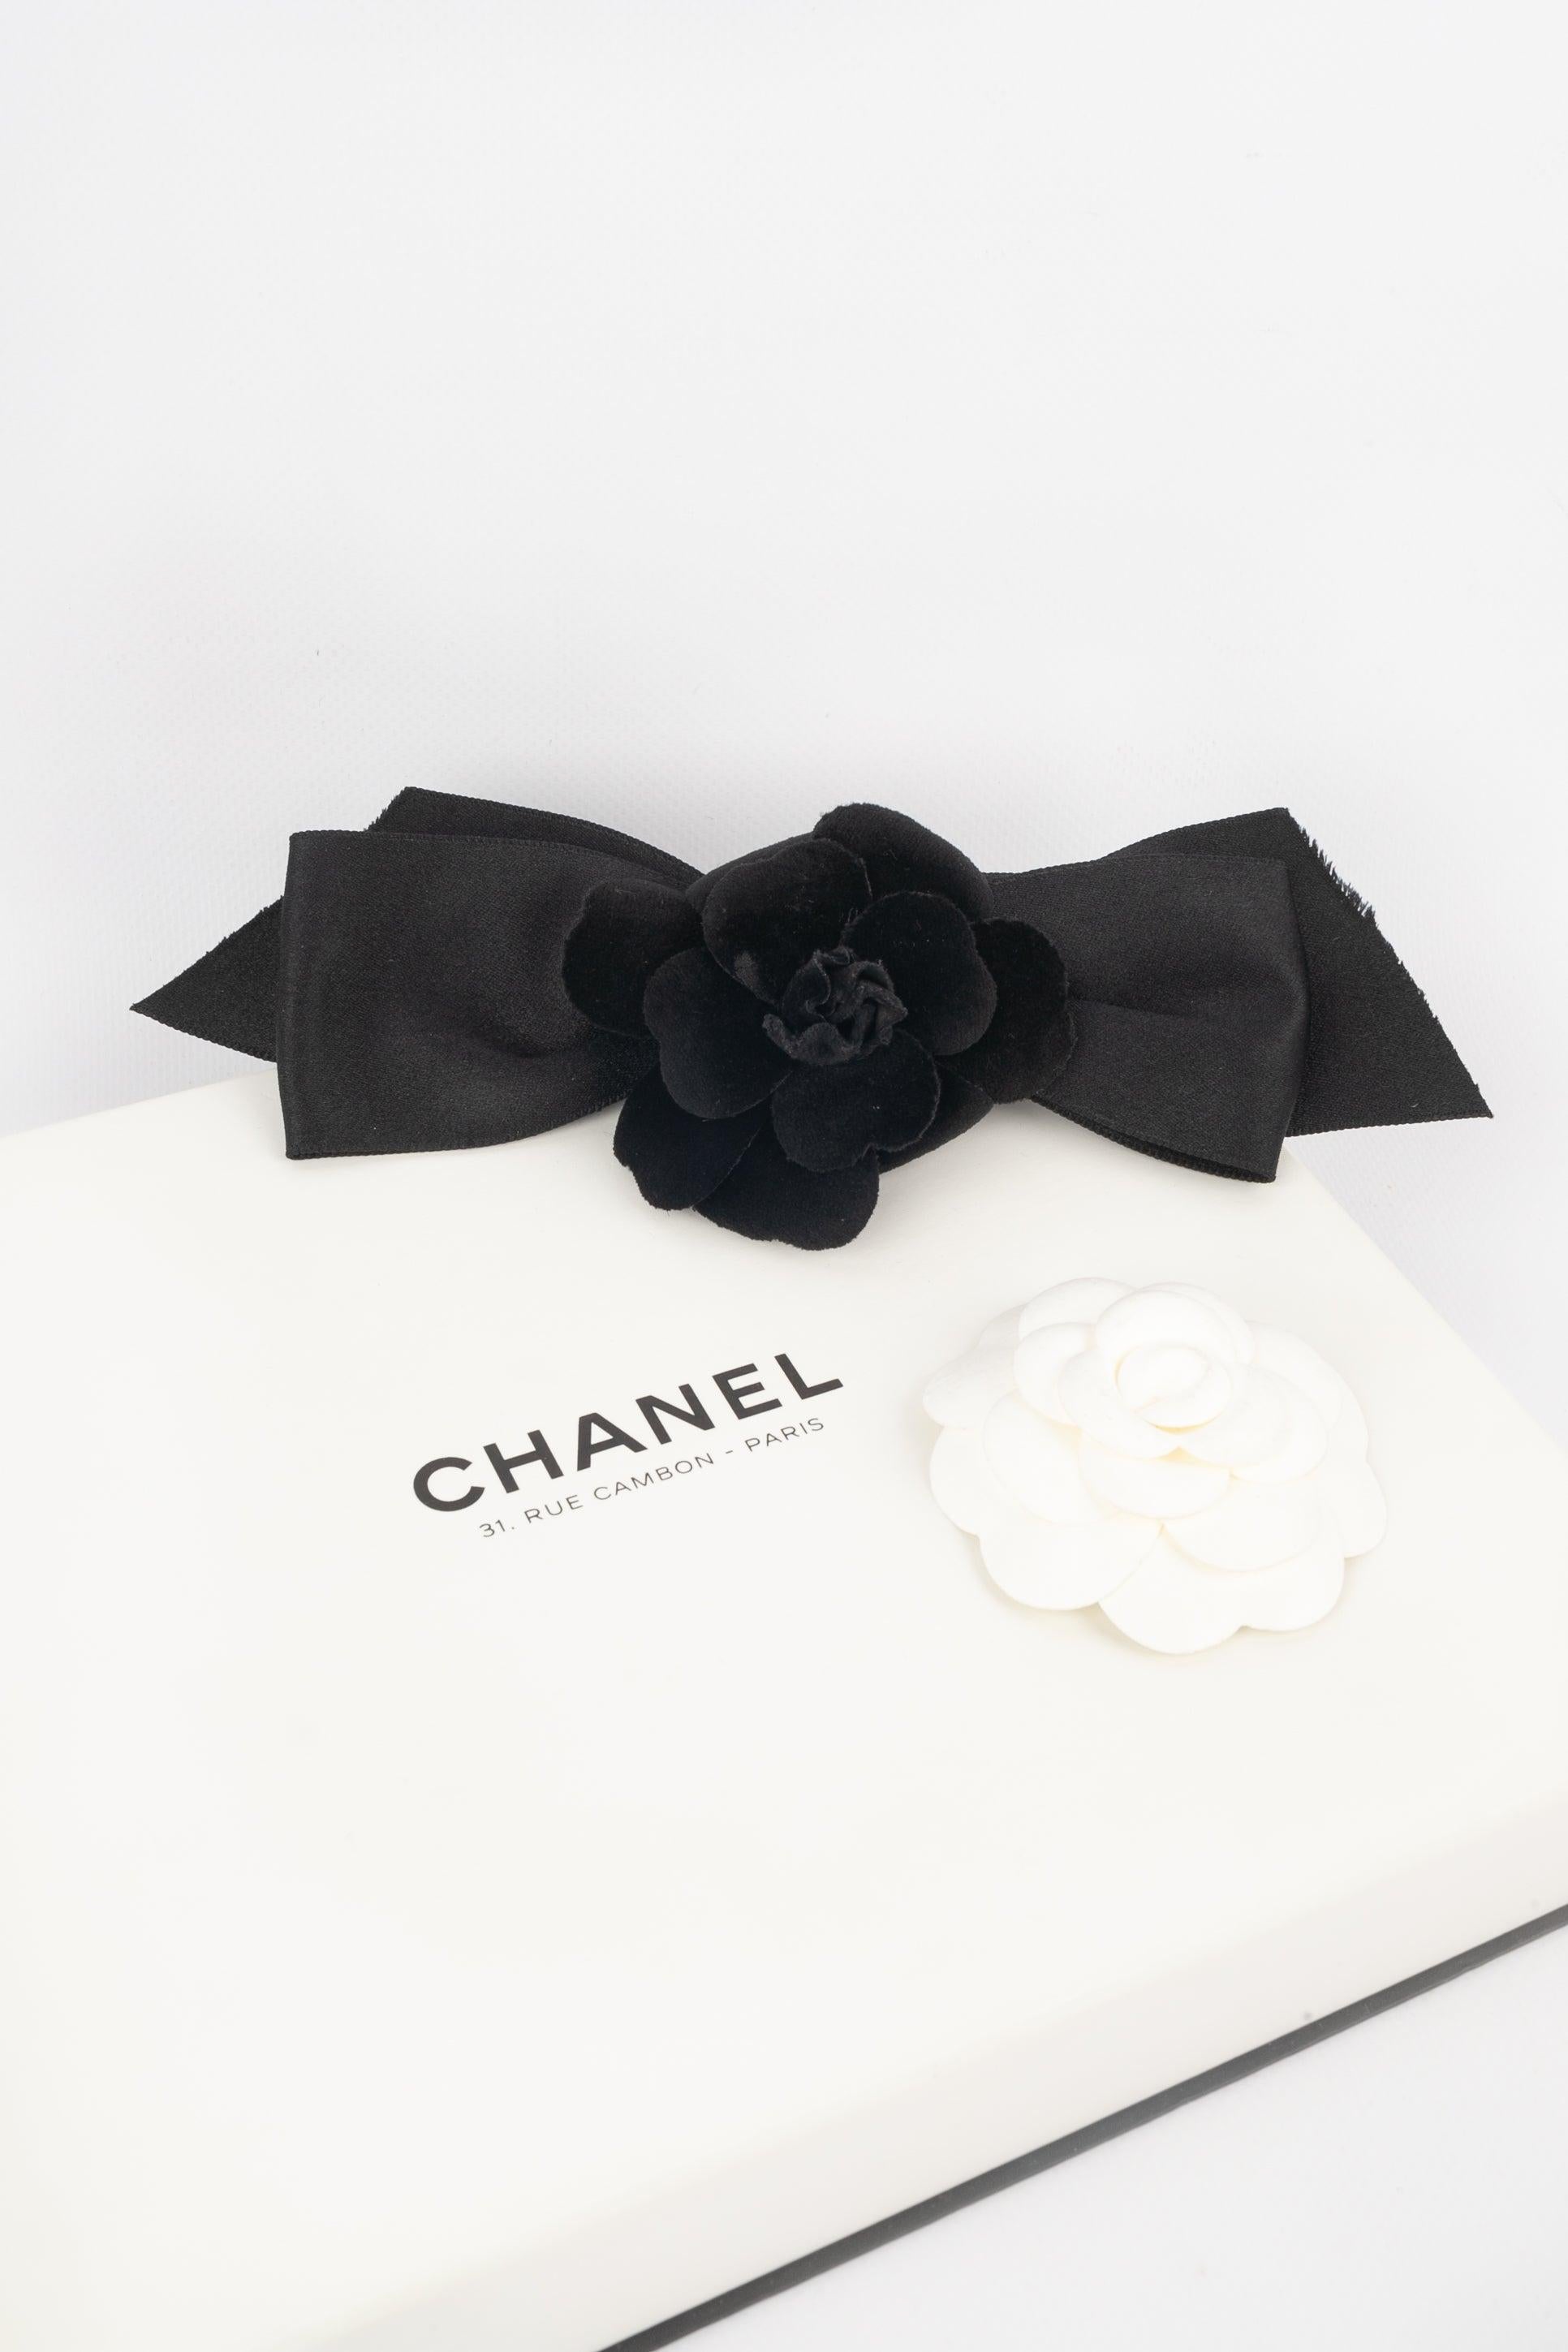 Chanel Head Accessory Black Bow with Velvet Camellia 3